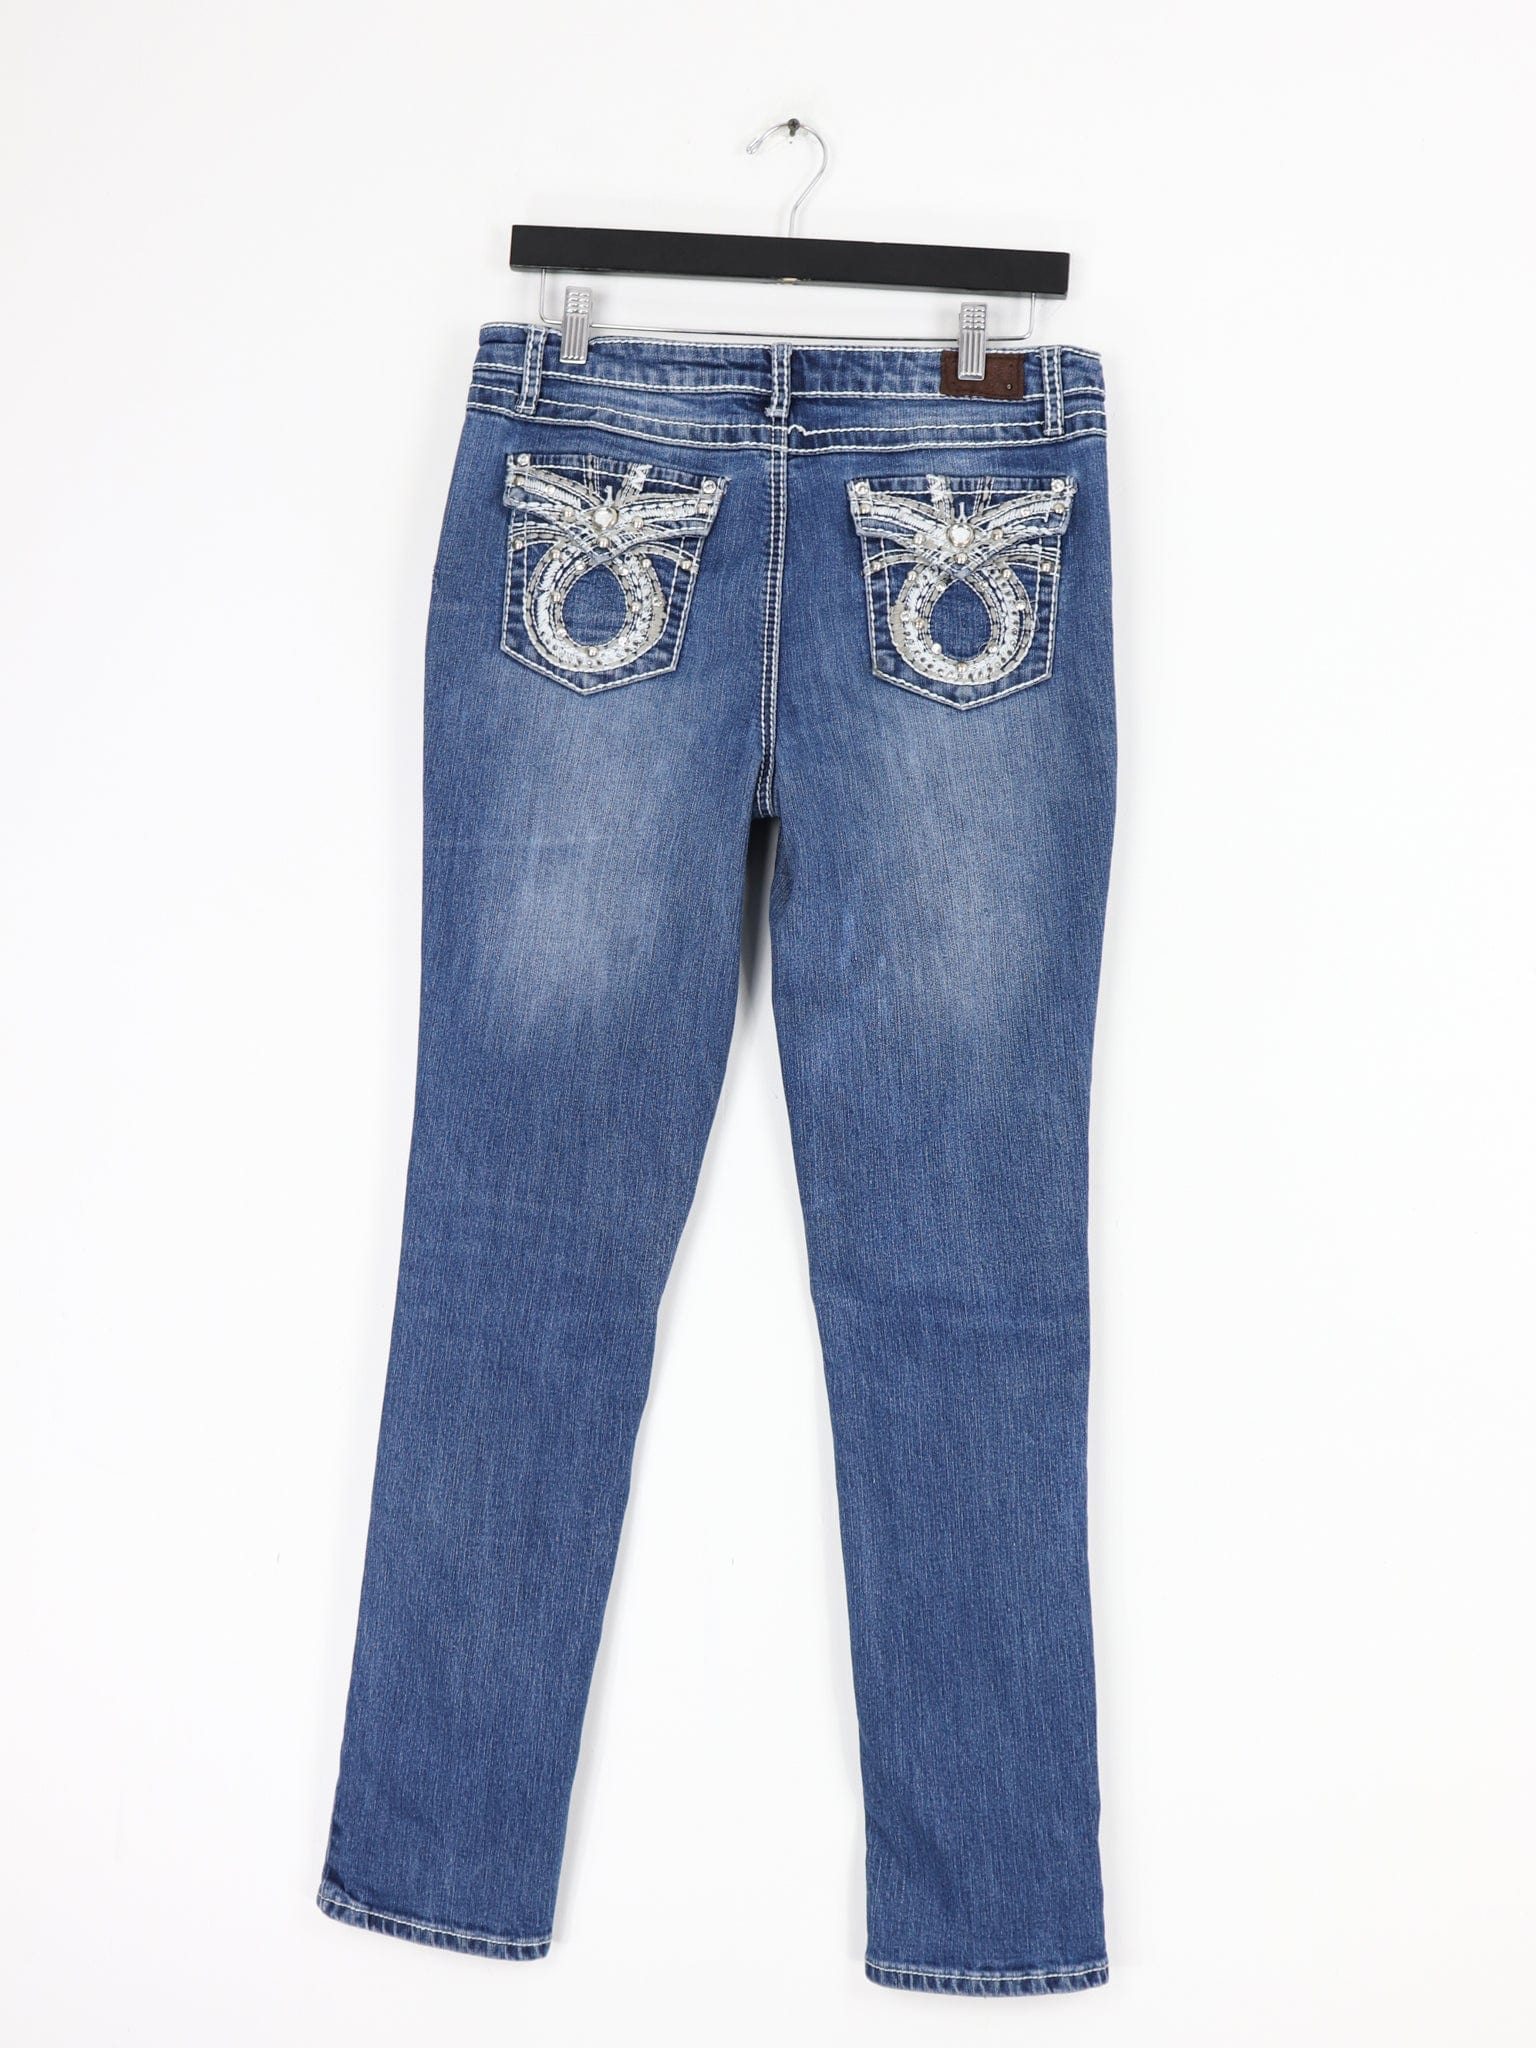 Earl Jeans, Jeans, Earl Jean Blue Jeans Bling Embroidered Womens Size 1